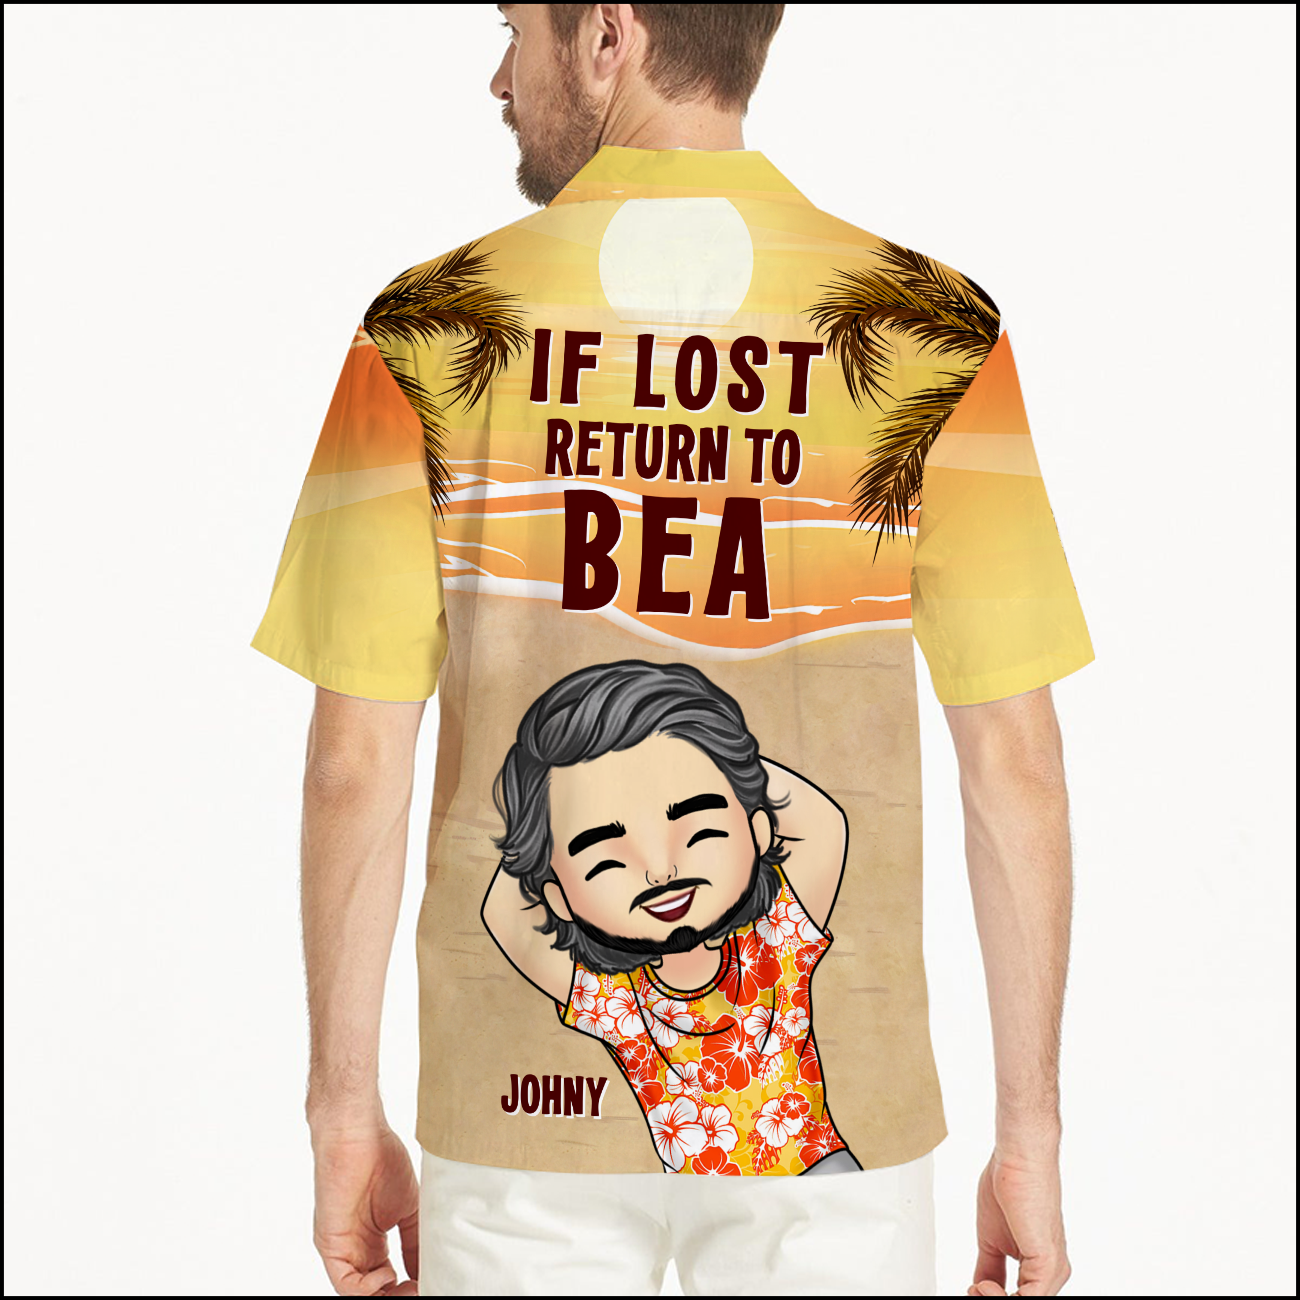 If Lost Return To Bae - Funny Personalized Hawaiian Shirt - Summer Vacation Gift, Birthday Party Gift For Husband Wife NVL22APR24KL2